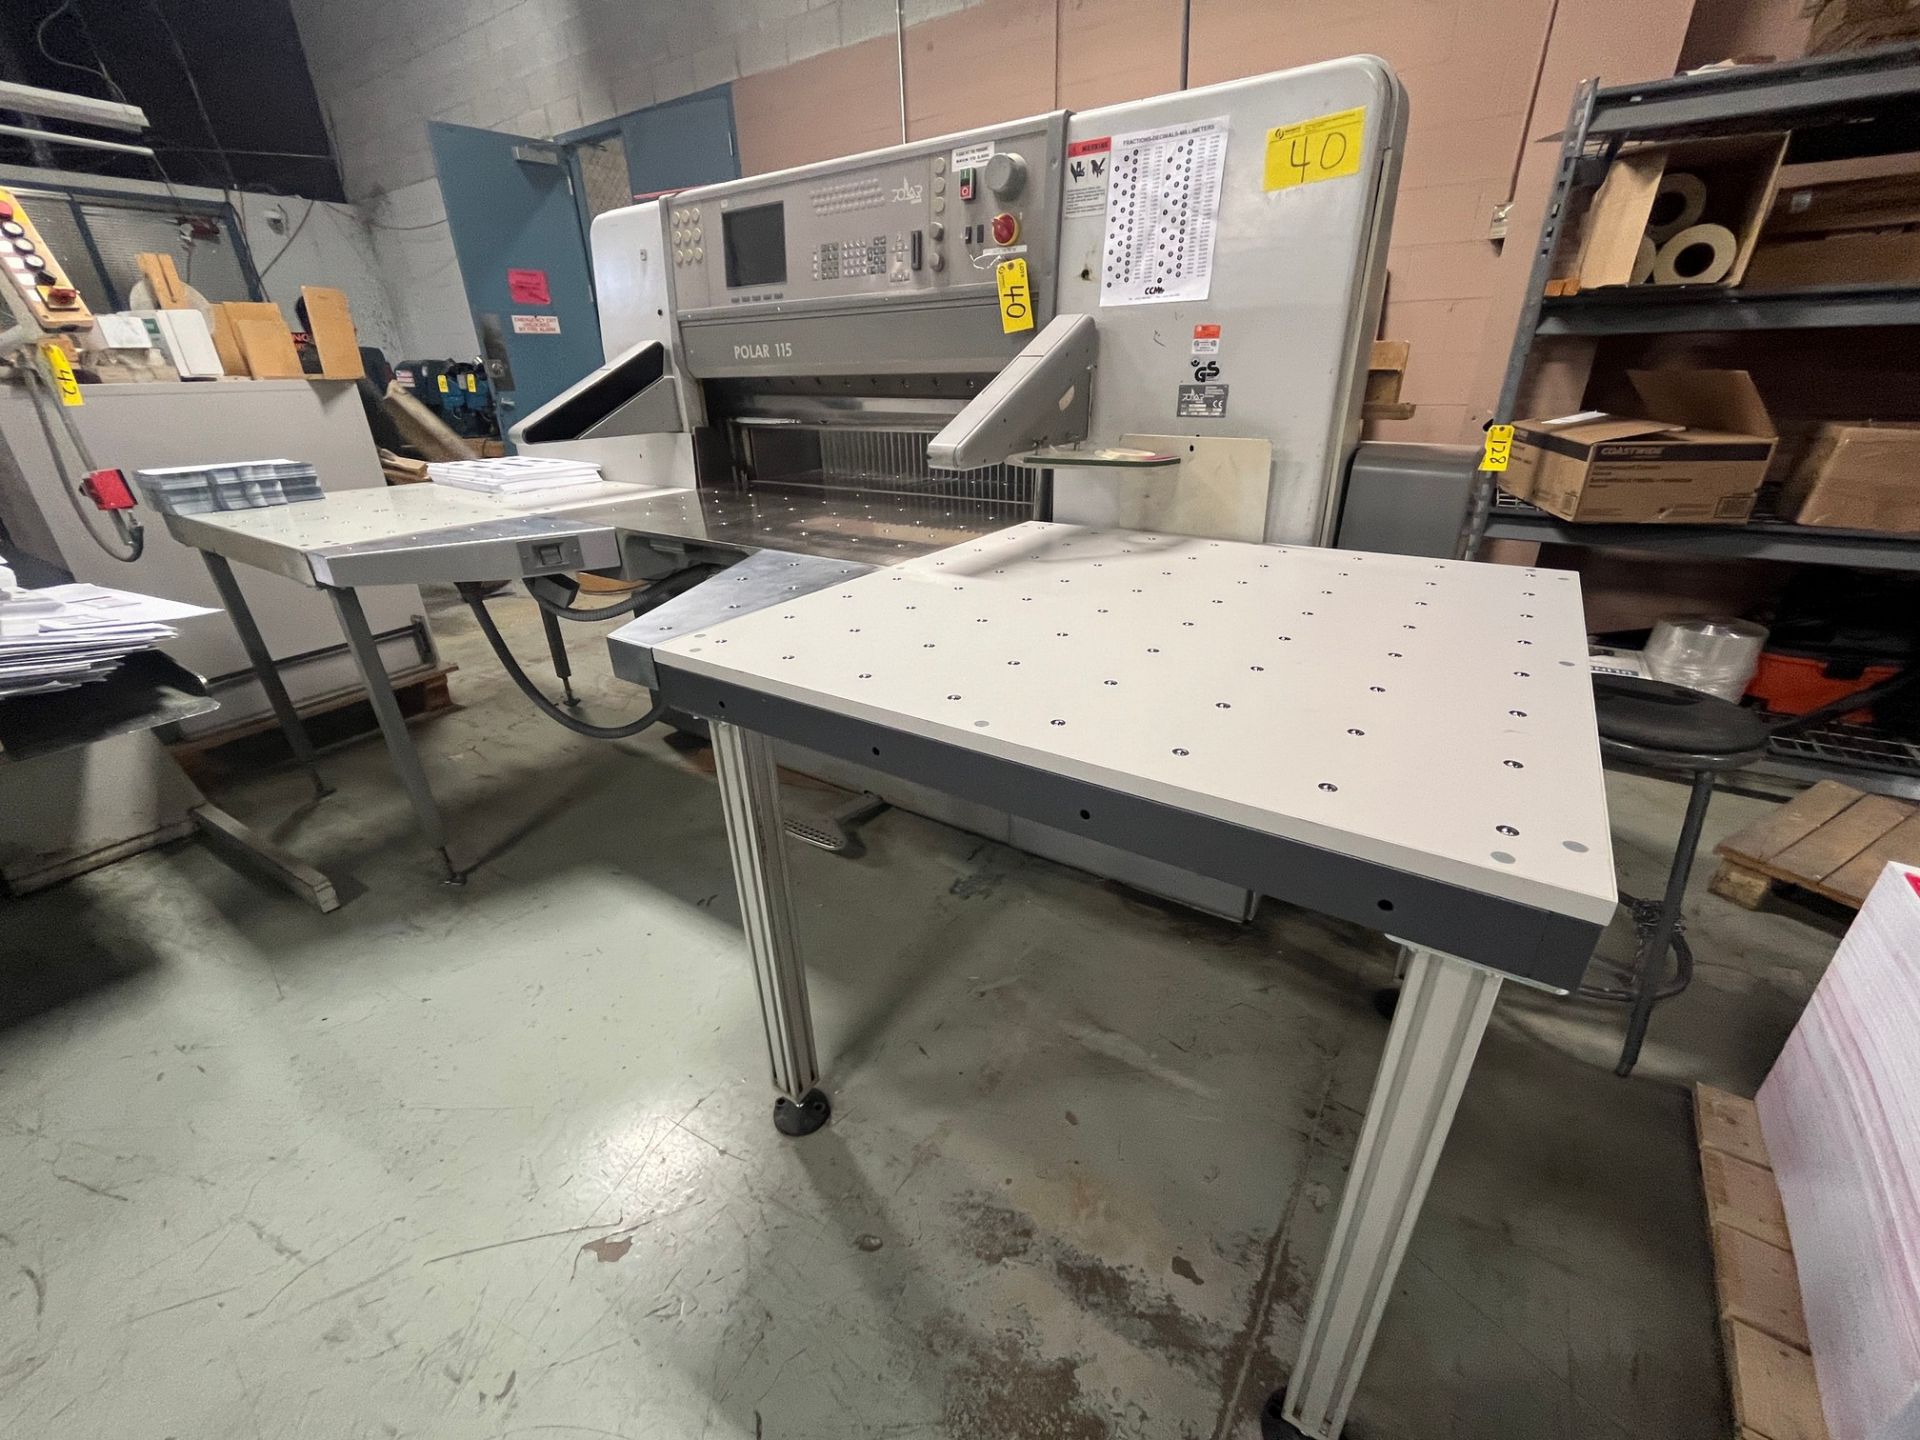 2000 POLAR MOHR 115 ED 45” PROGRAMMABLE PAPER CUTTER / GUILLOTINE CUTTER, S/N 7031262